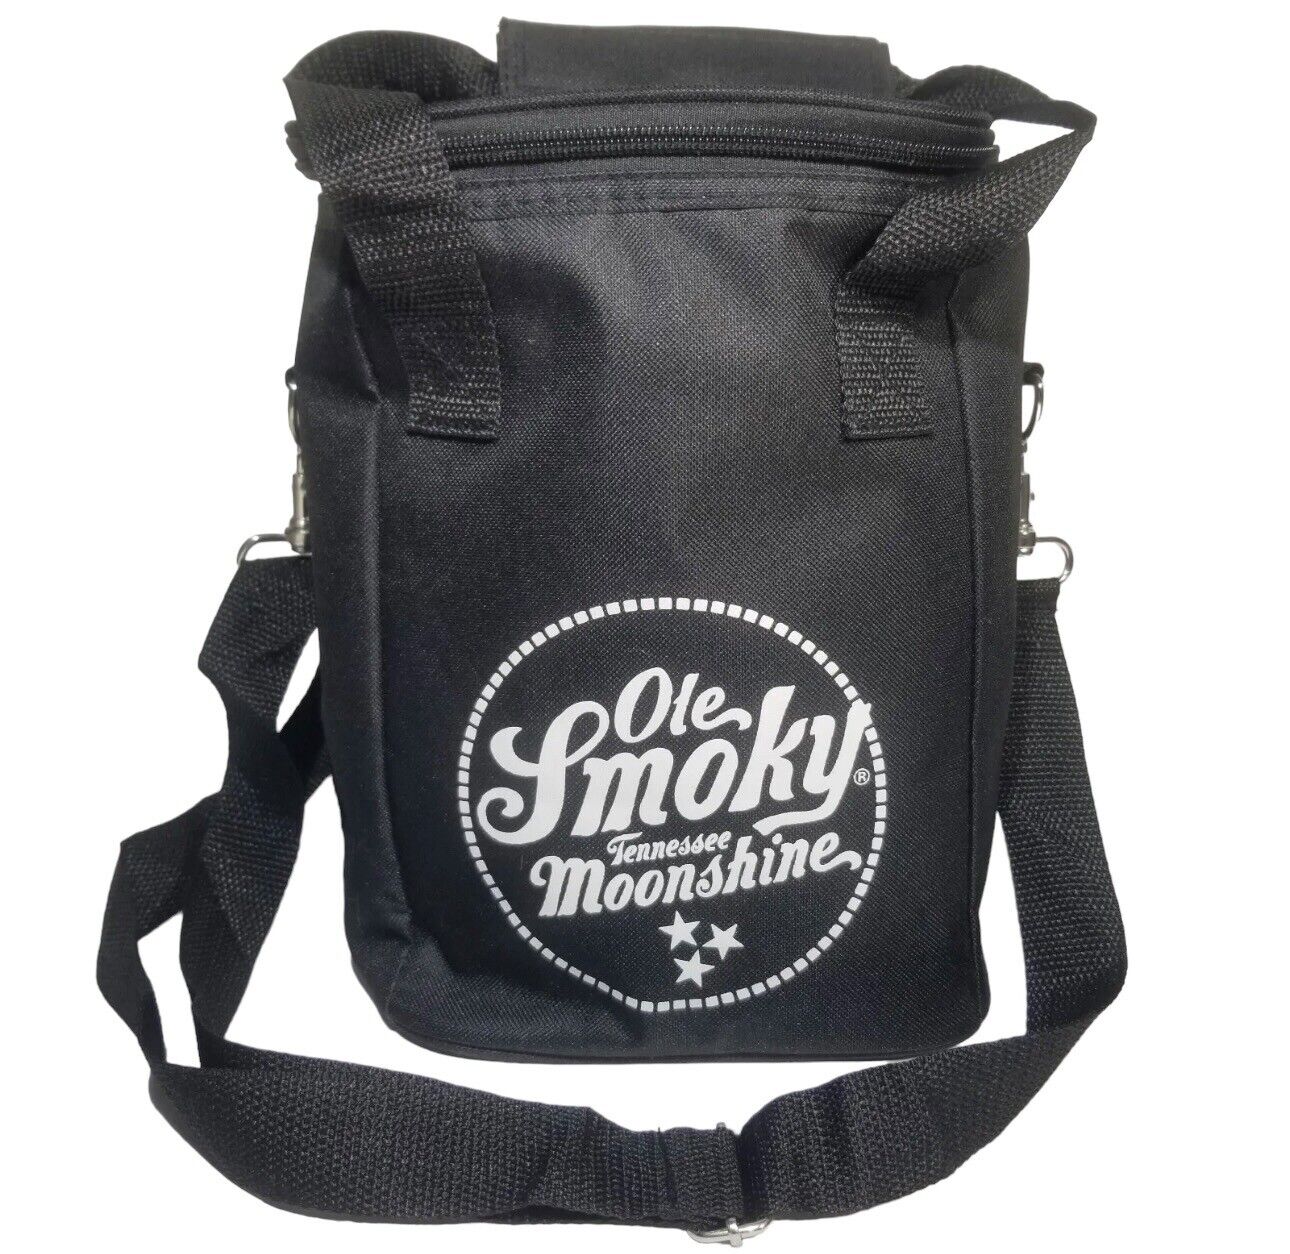 Ole Smoky Tennessee Moonshine Soft Cooler Insulated Bag Smokey Shoulder Strap